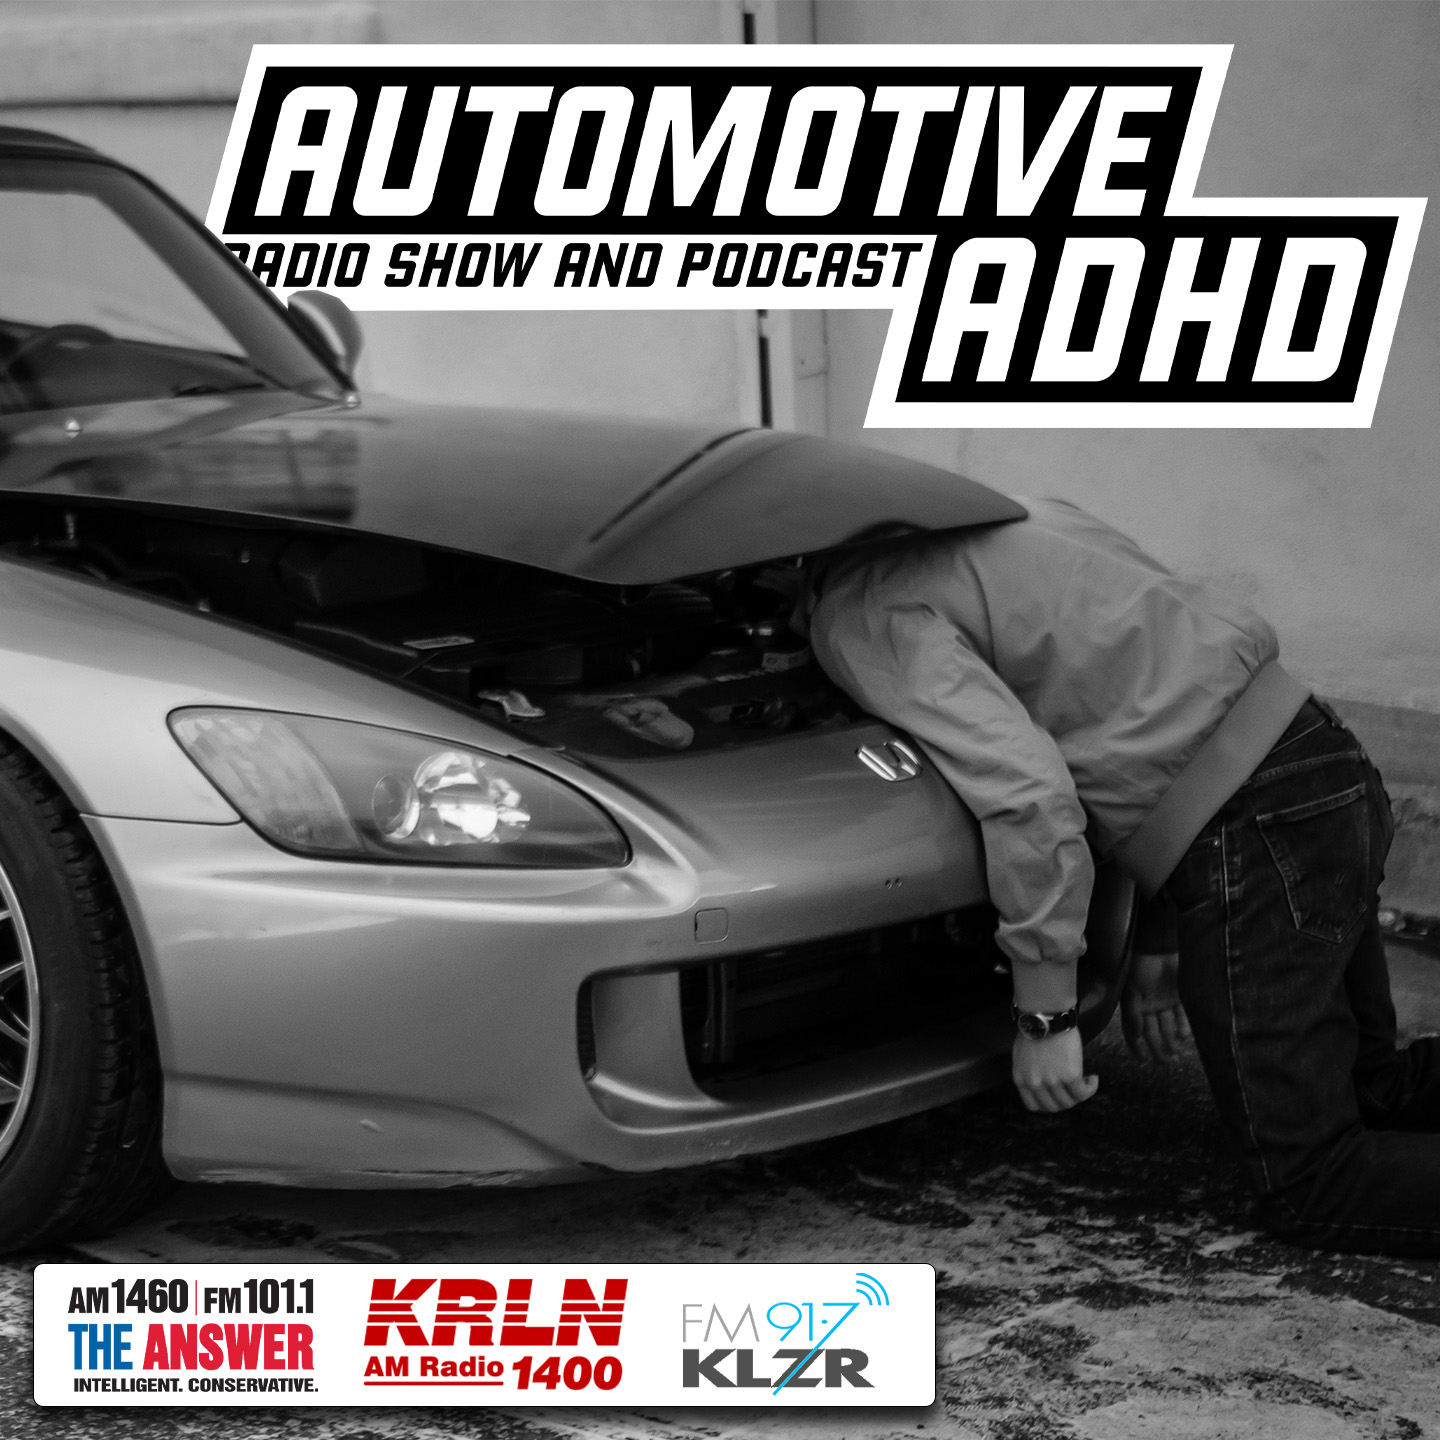 Artwork for Automotive ADHD